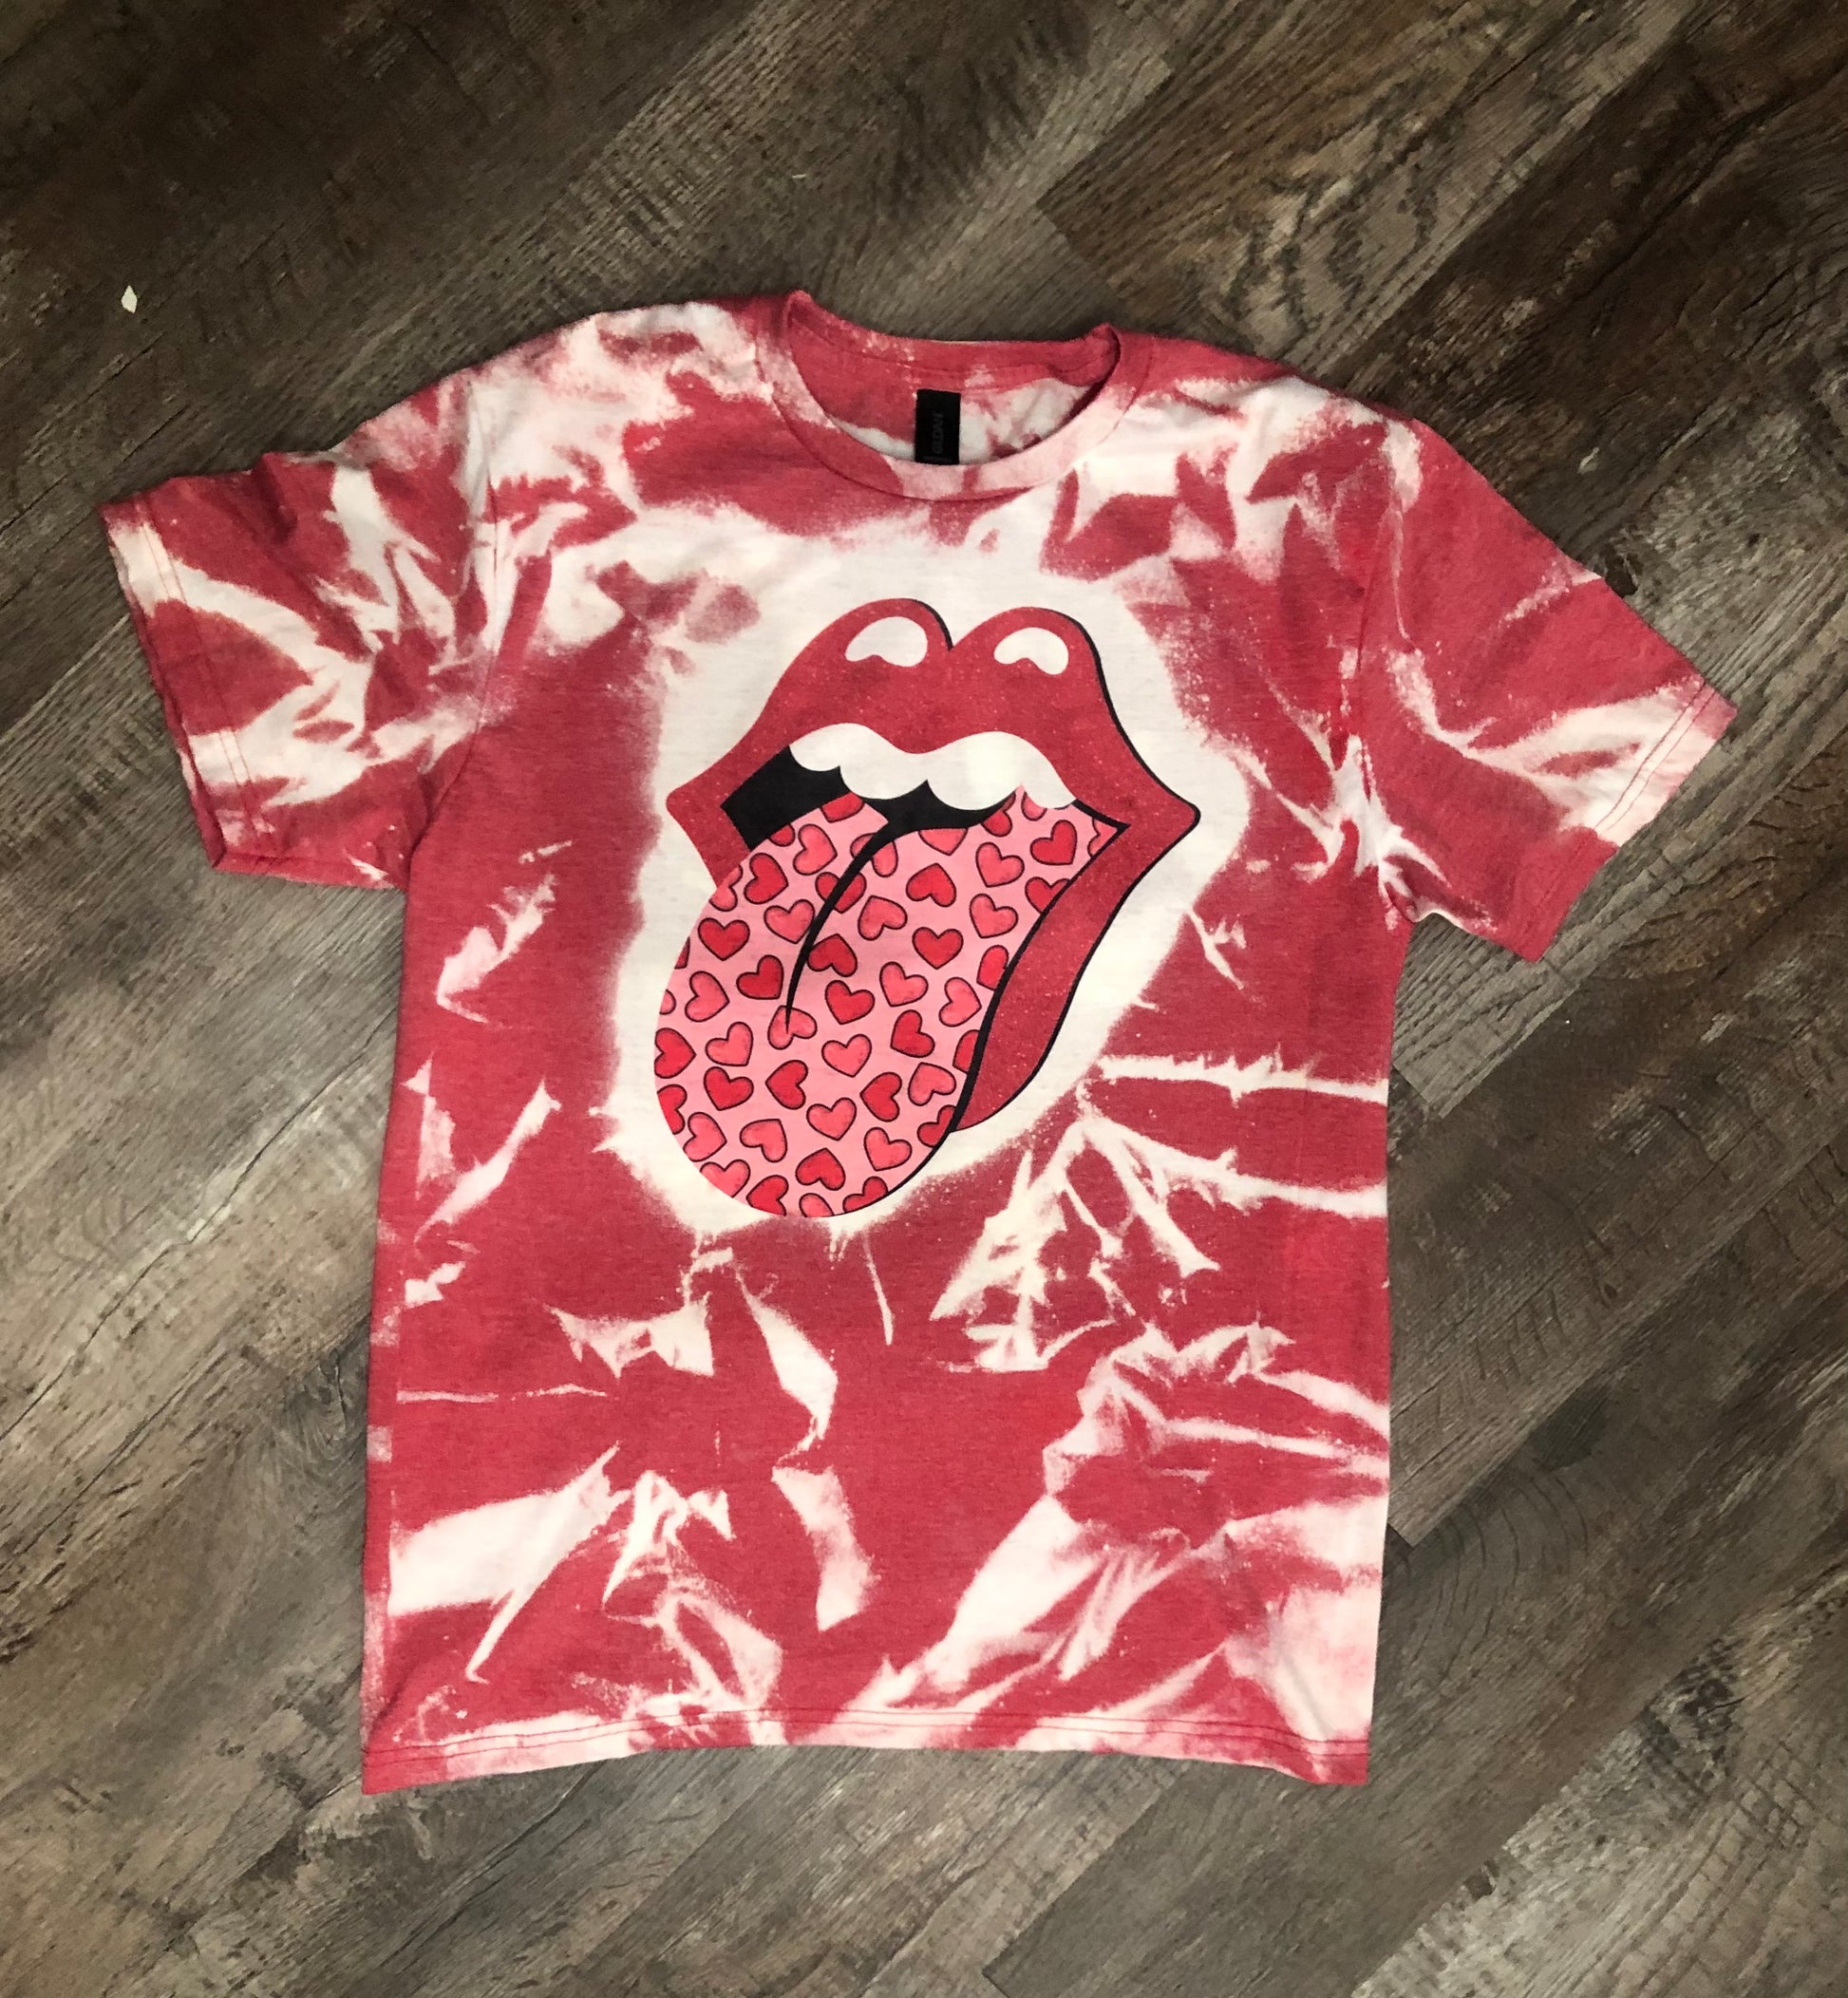 Valentine Tie Dye Stones Inspired shirt.  Candy hearts tongue, glitter effect red lips